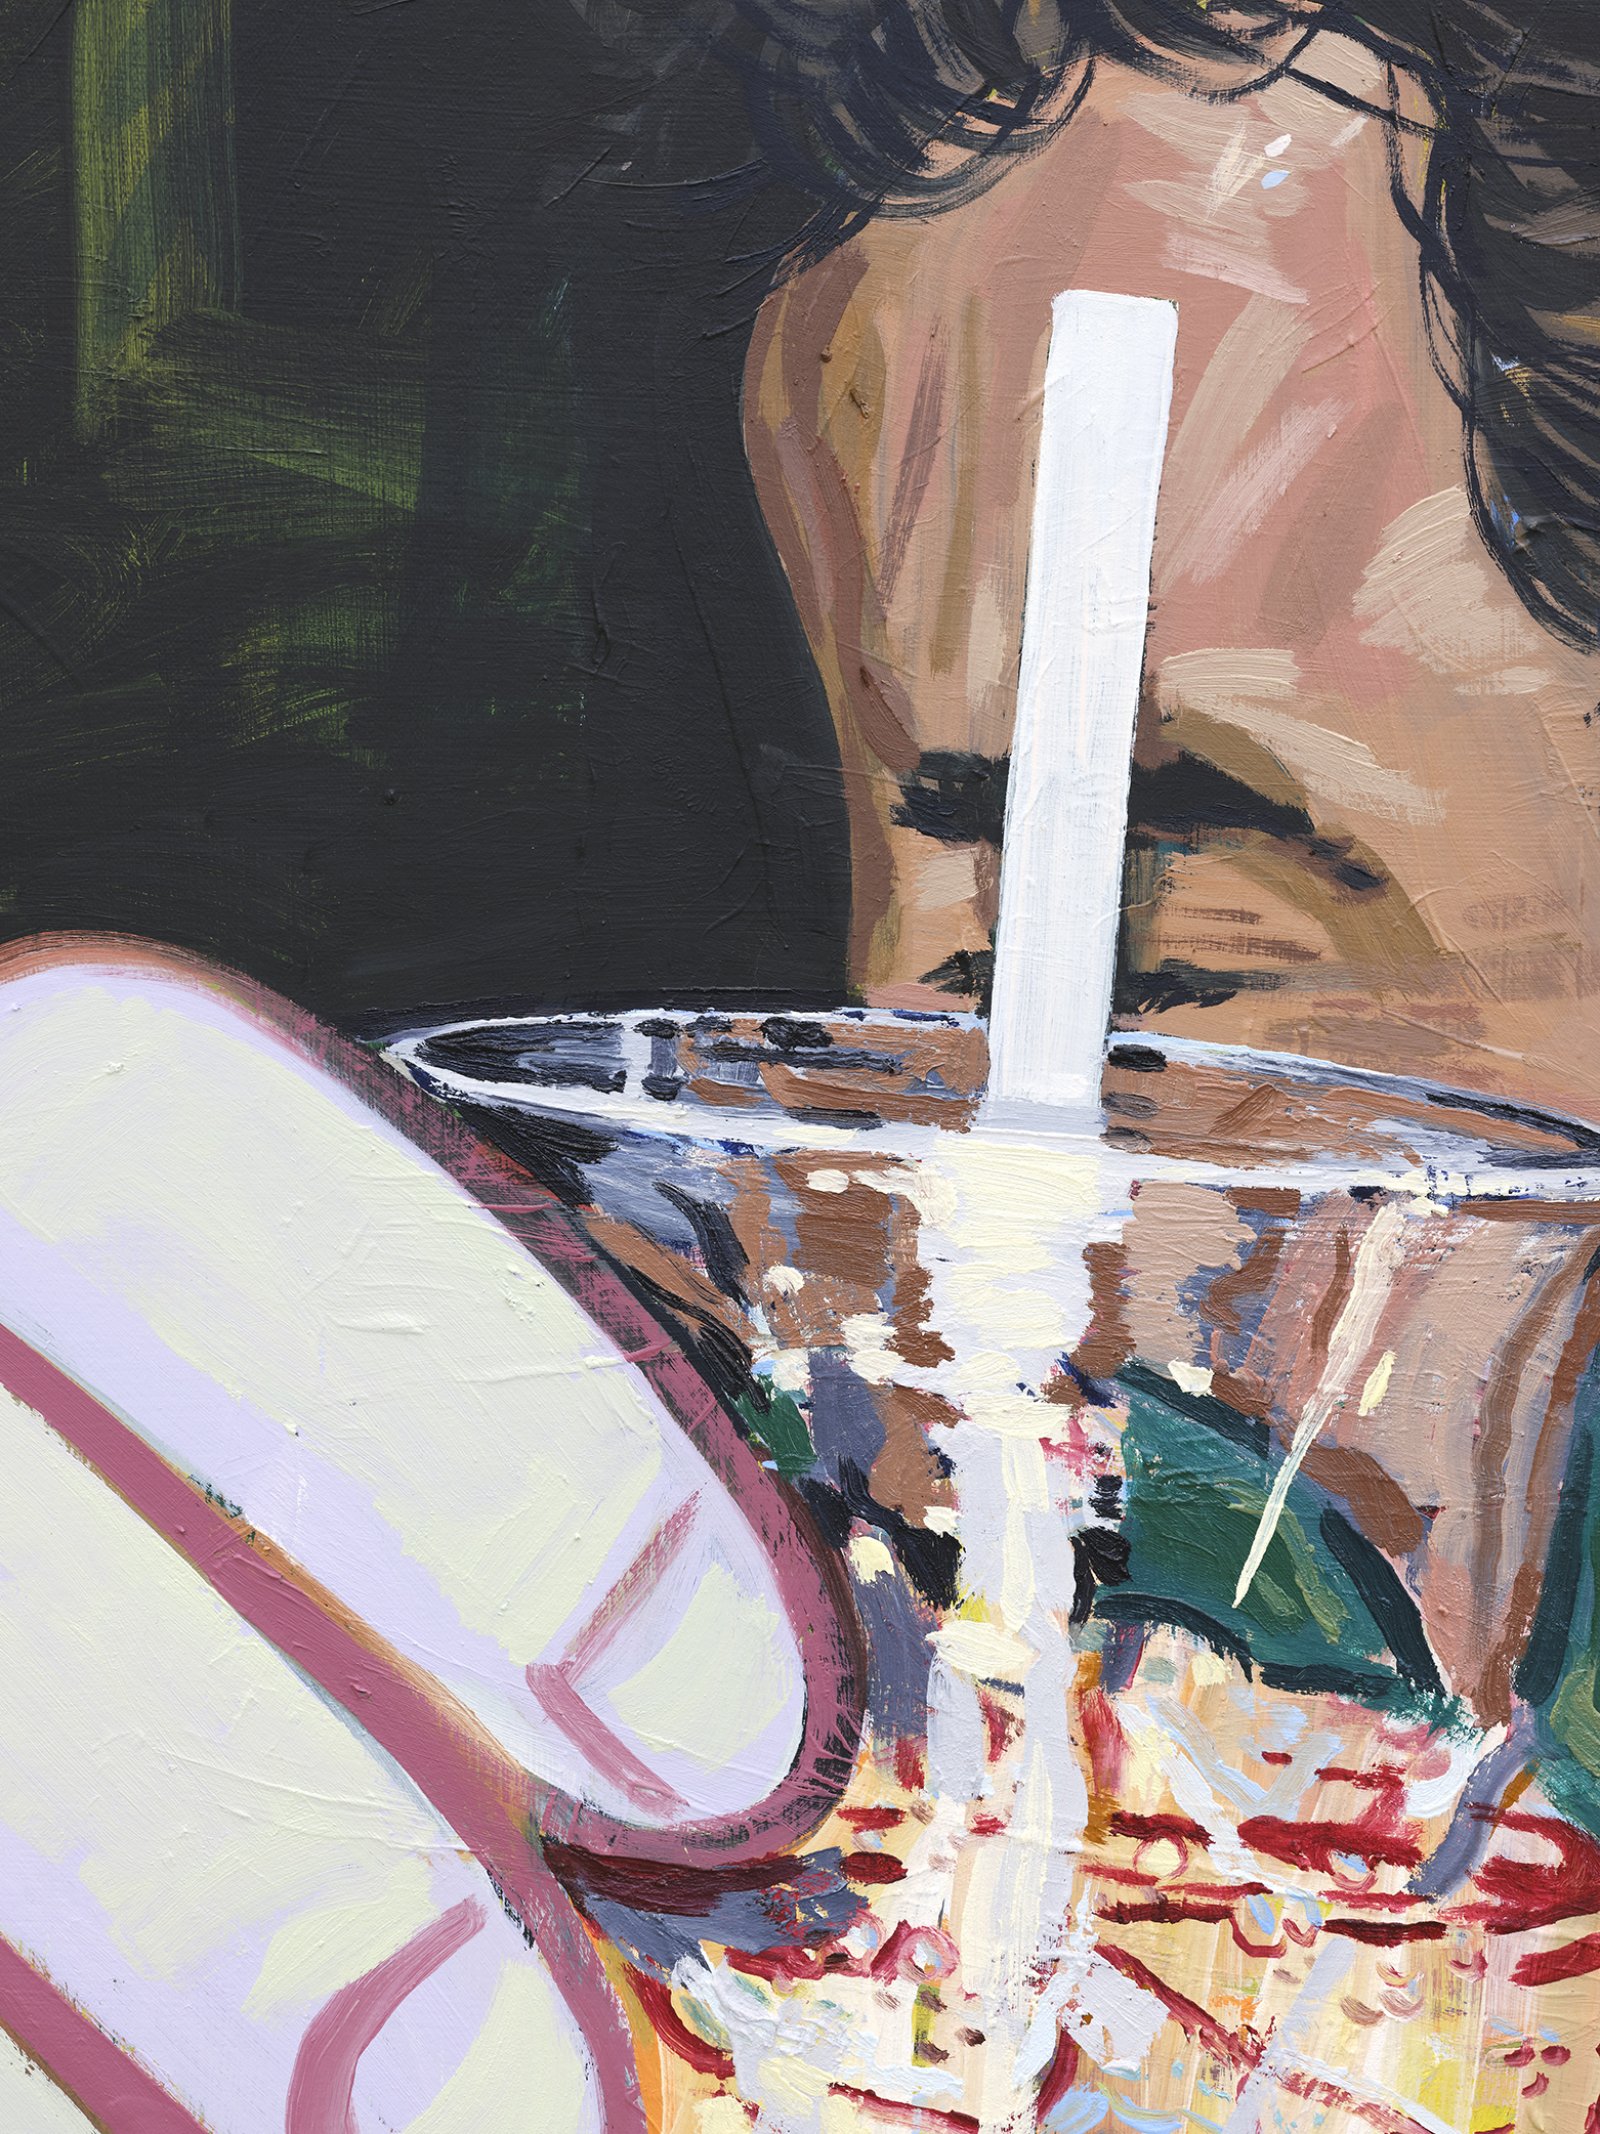 ​Damian Moppett, Hand and Head (detail), 2020, oil on canvas, 42 x 50 in. (107 x 126 cm)​ by Damian Moppett